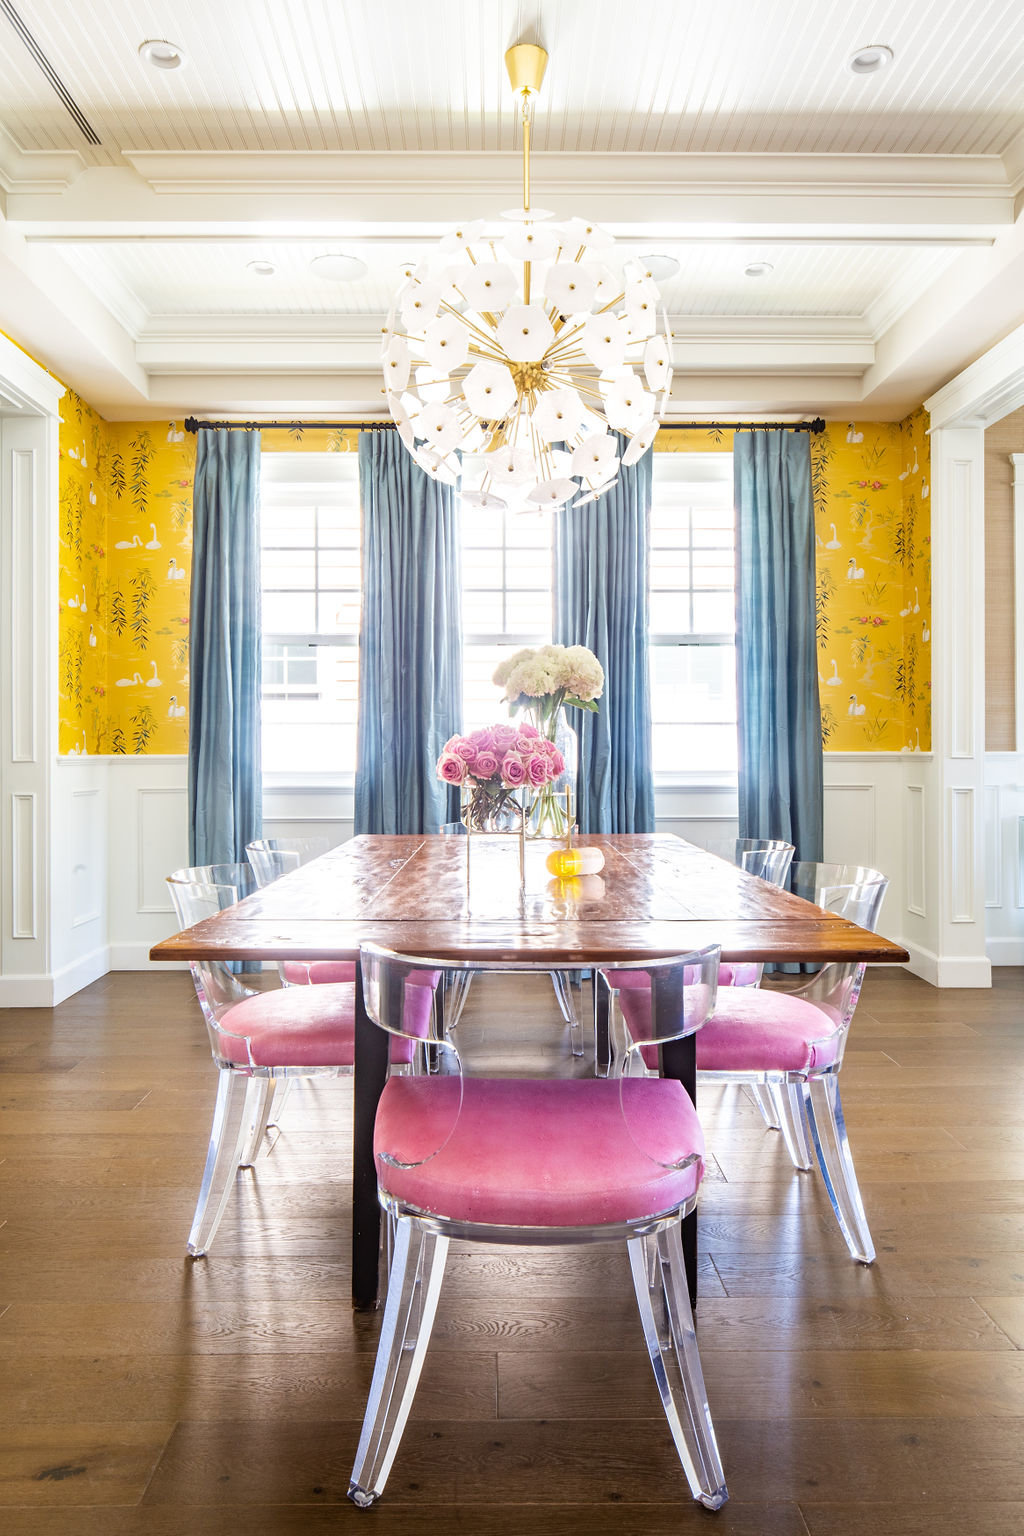 Dining Room Nina Campbell Swan Lake, wainscoting, and Lucite chairs with pink cushions